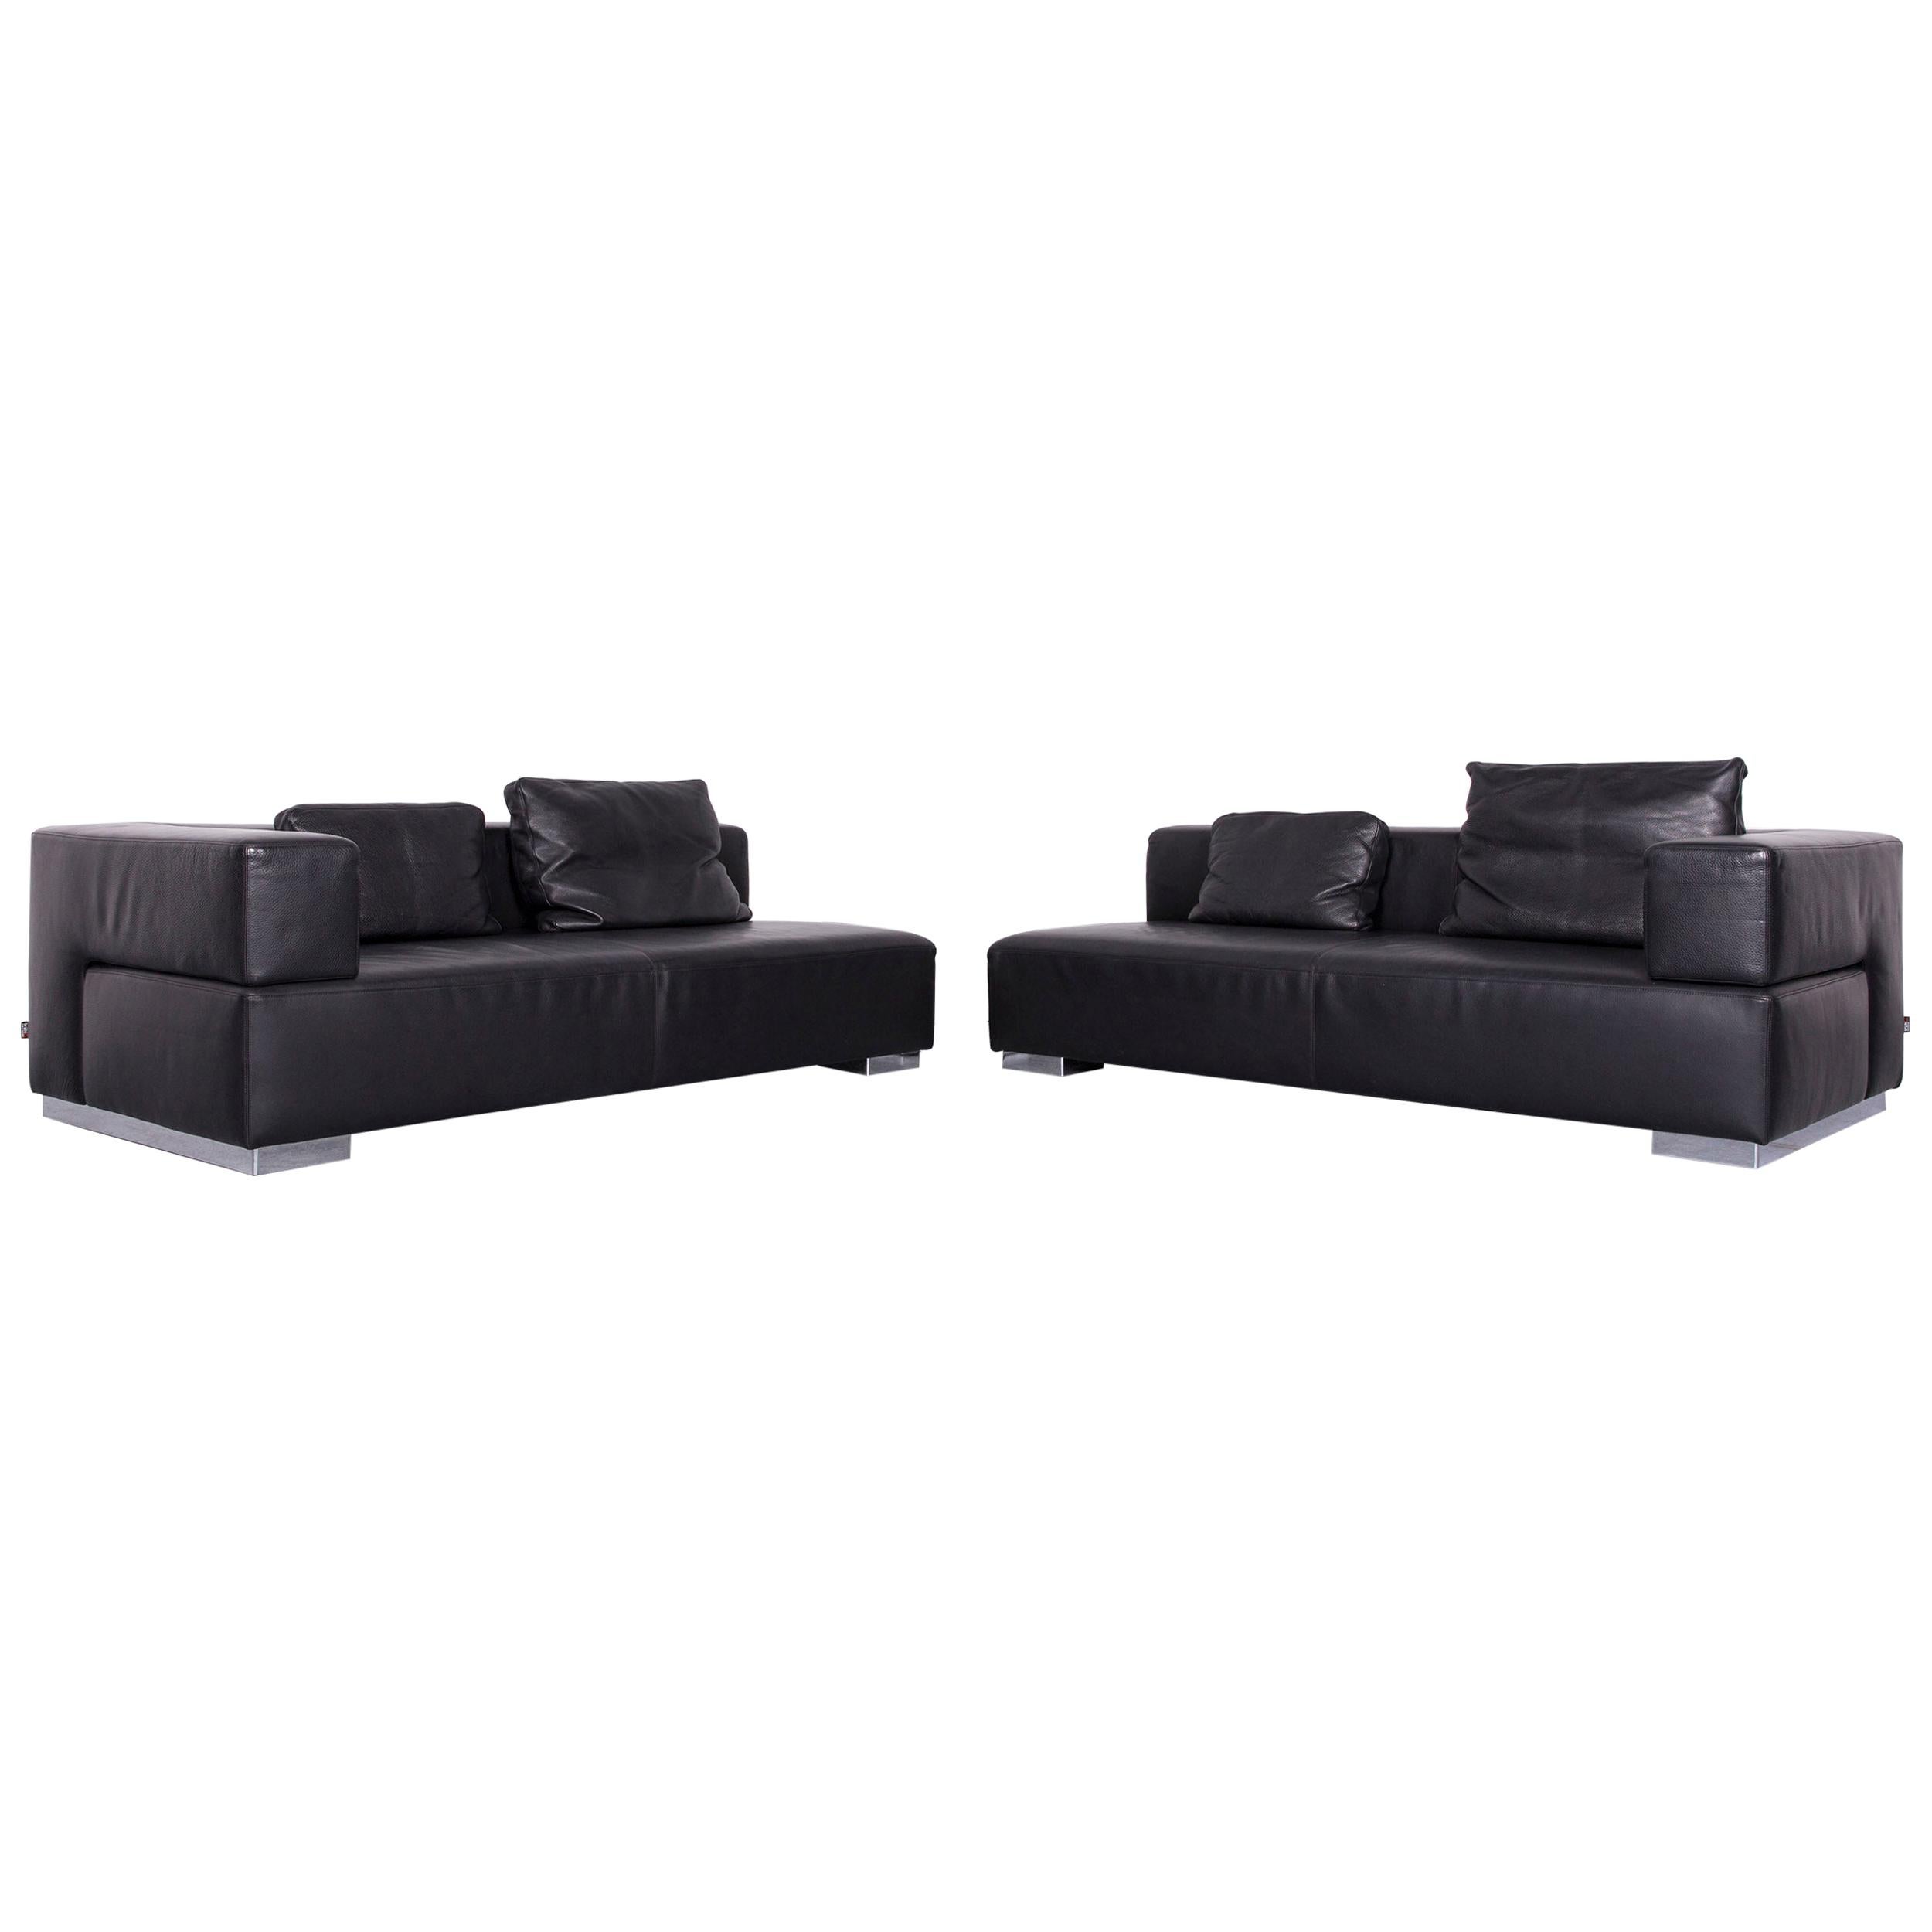 Brühl & Sippold Designer Sofa Set Leather Black Two-Seat Couch Modern For Sale